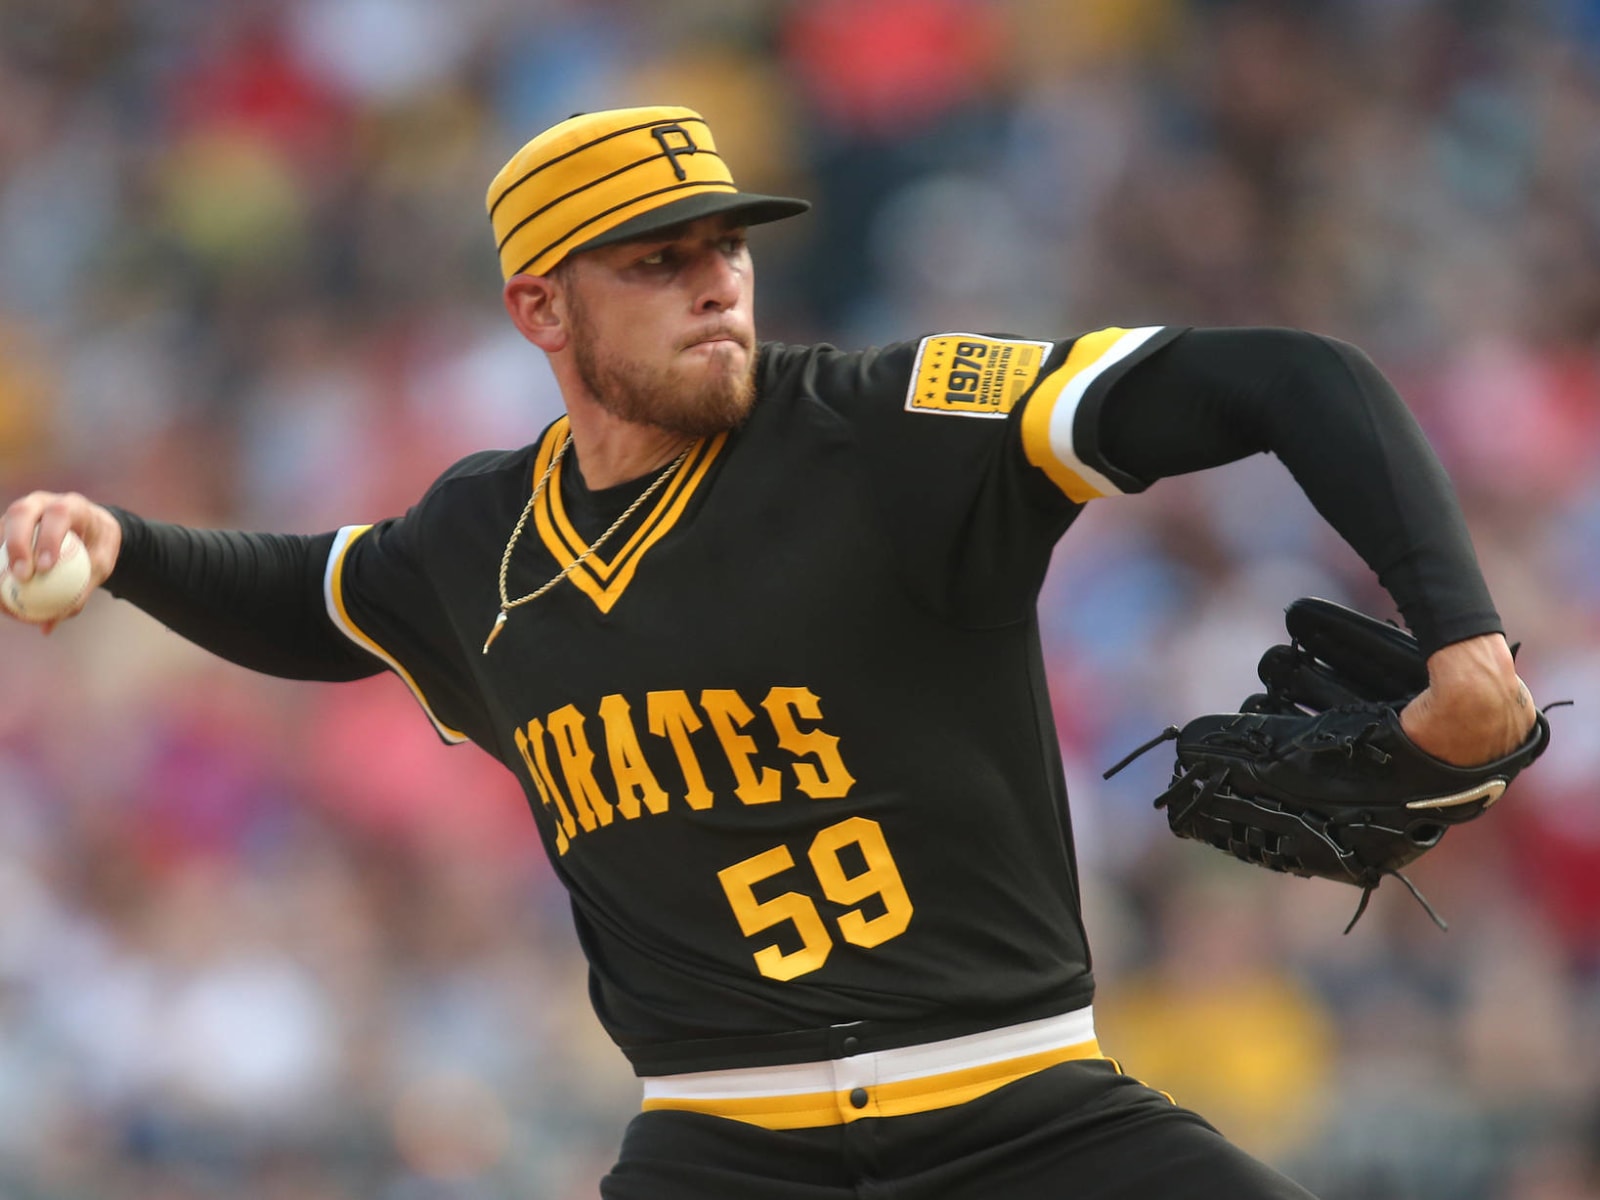 Pirates' 1979 throwbacks are absolute fire